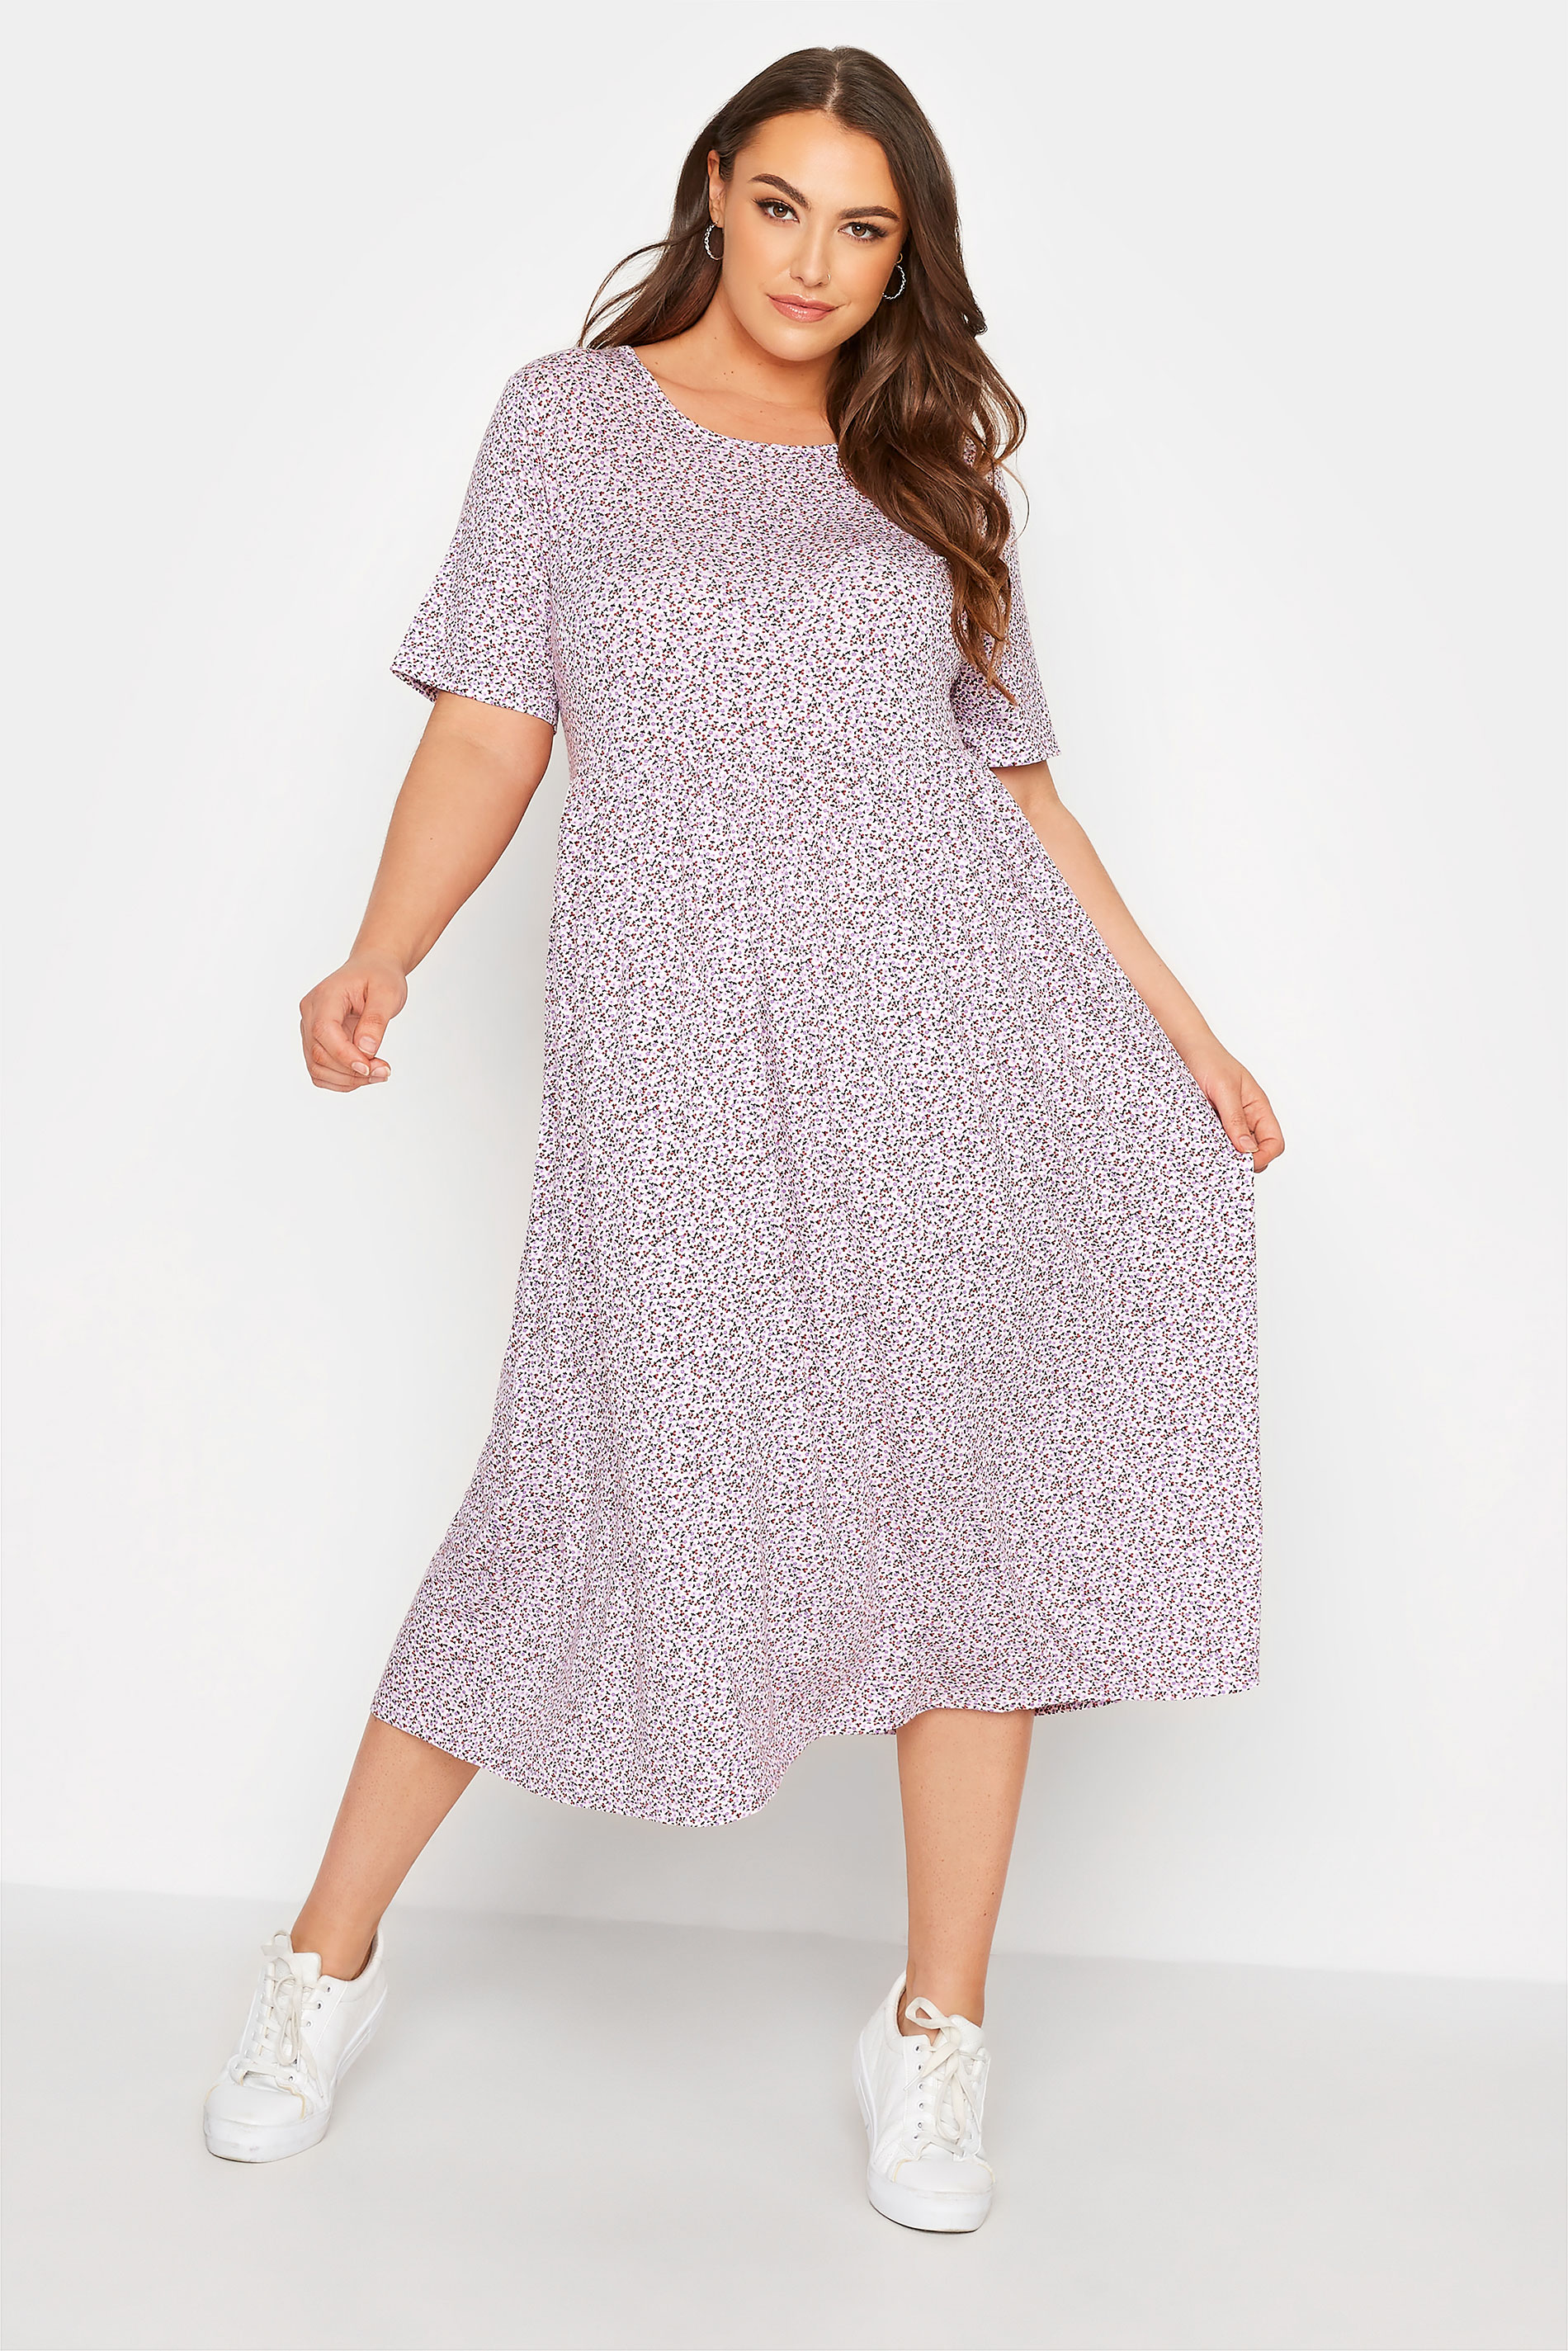 LIMITED COLLECTION Curve Lilac Purple Ditsy Floral Midaxi Dress_A.jpg